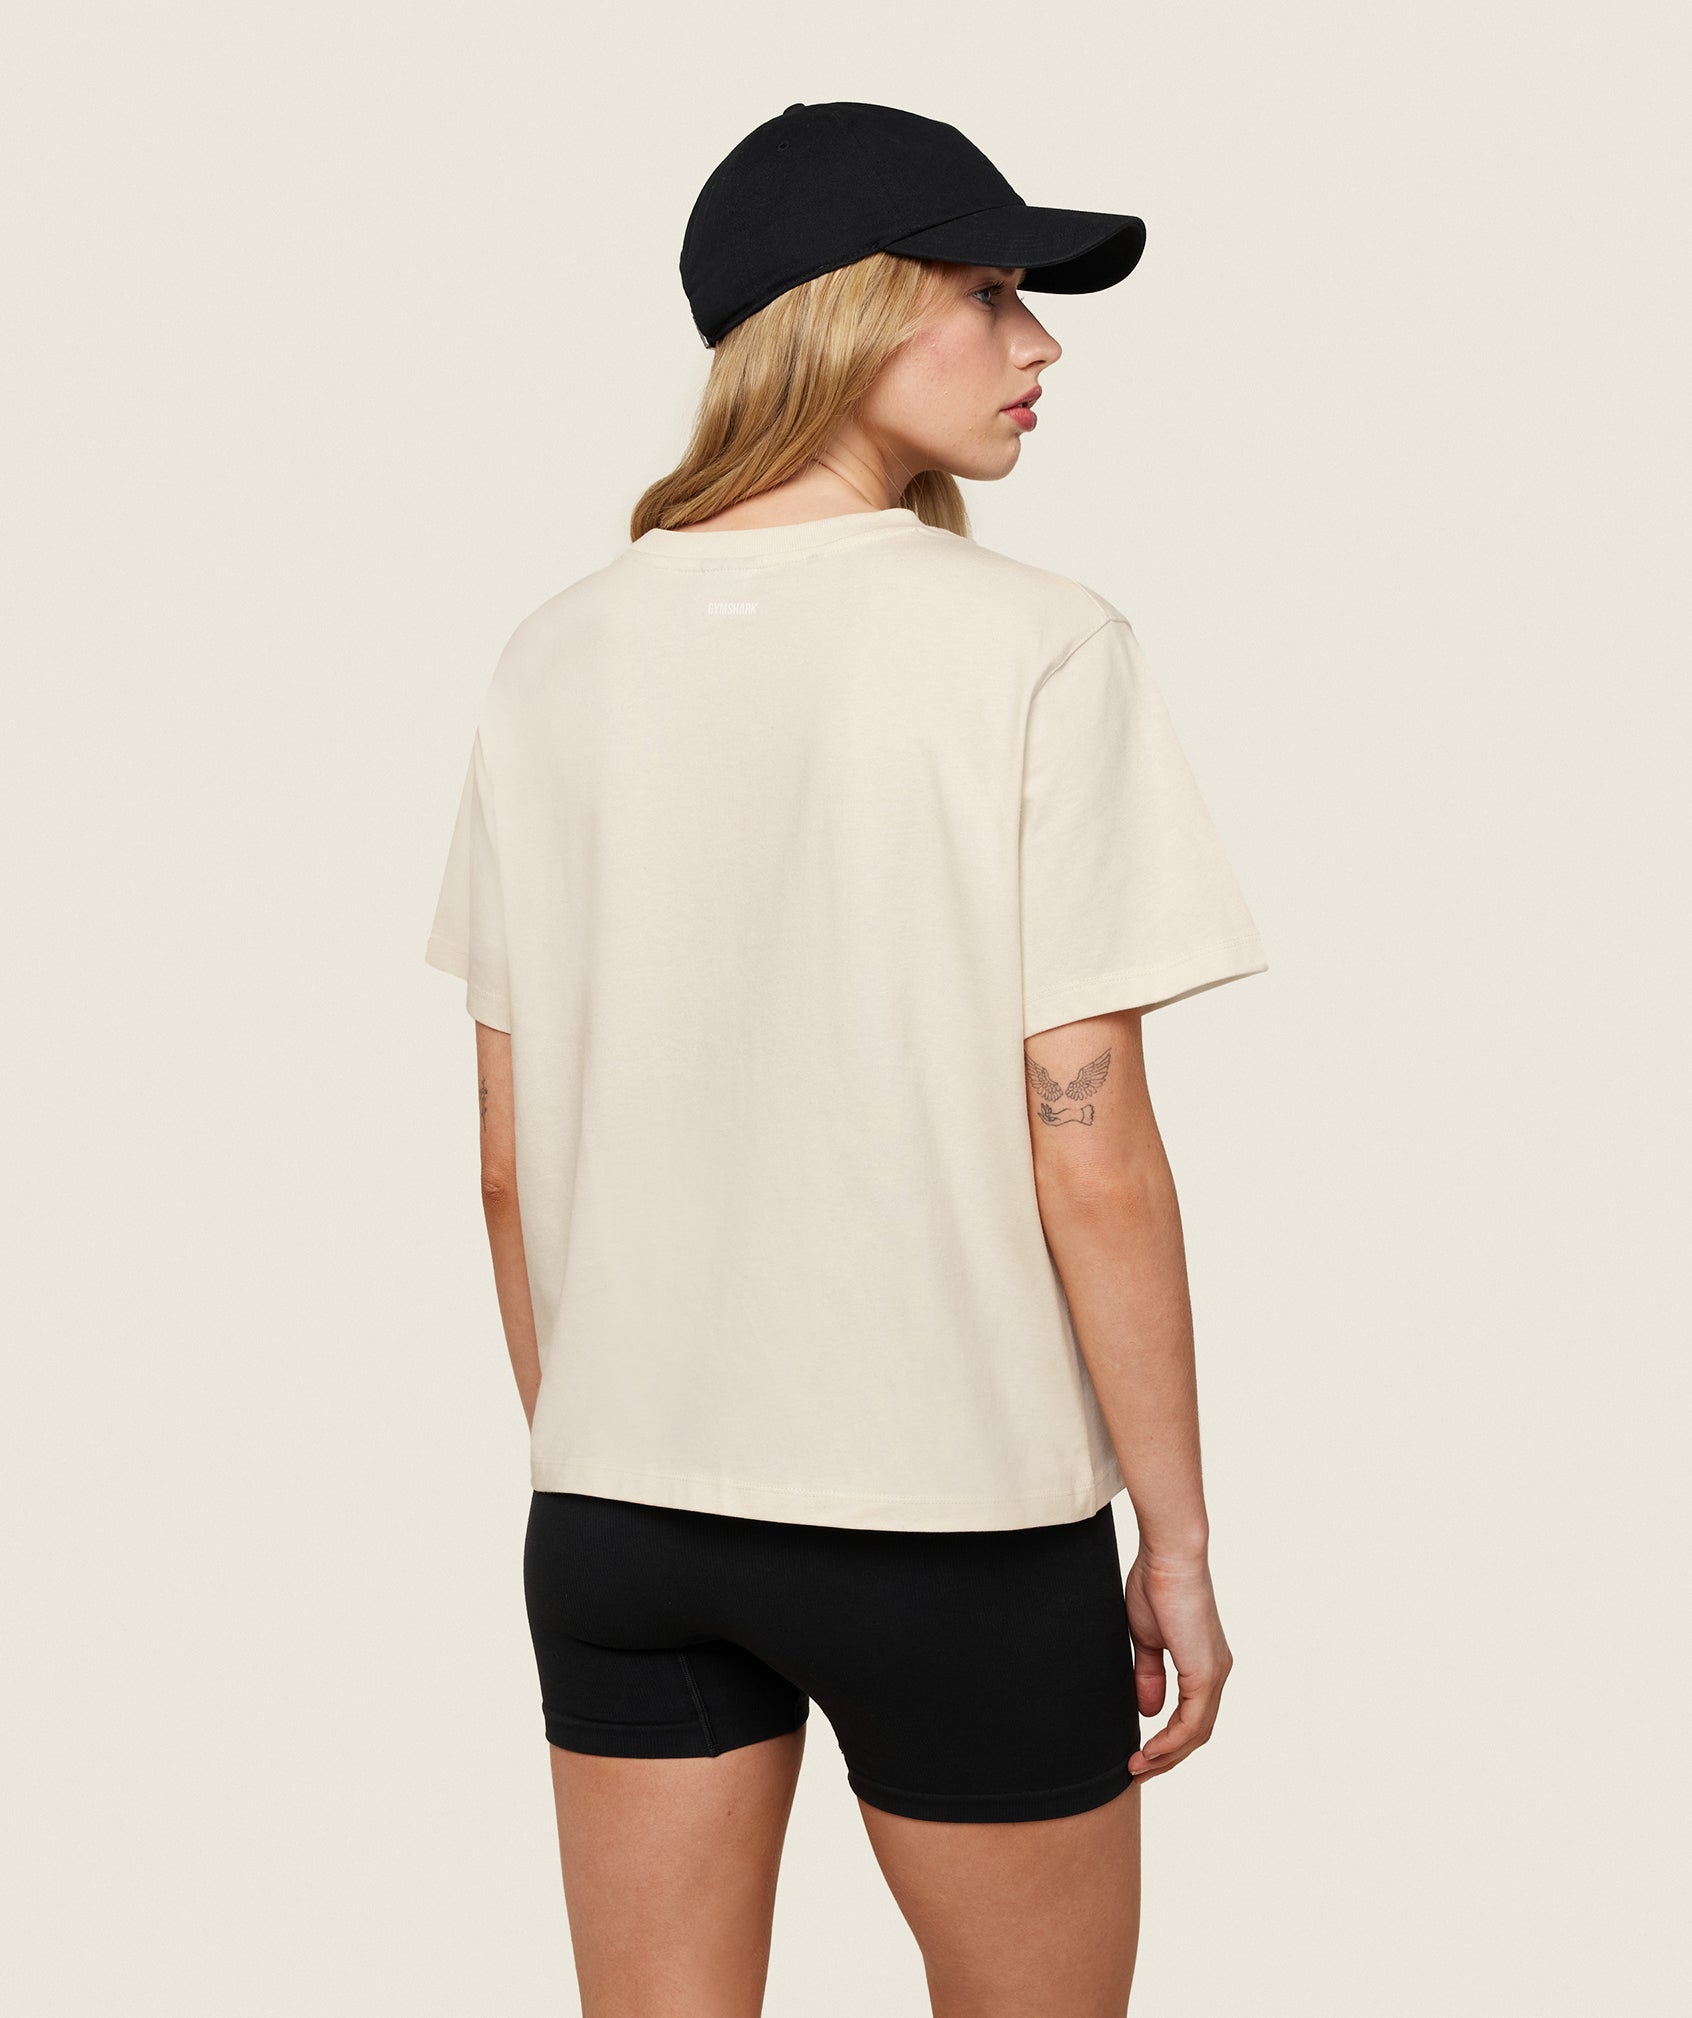 Phys Ed Graphic T-Shirt in Ecru White - view 2